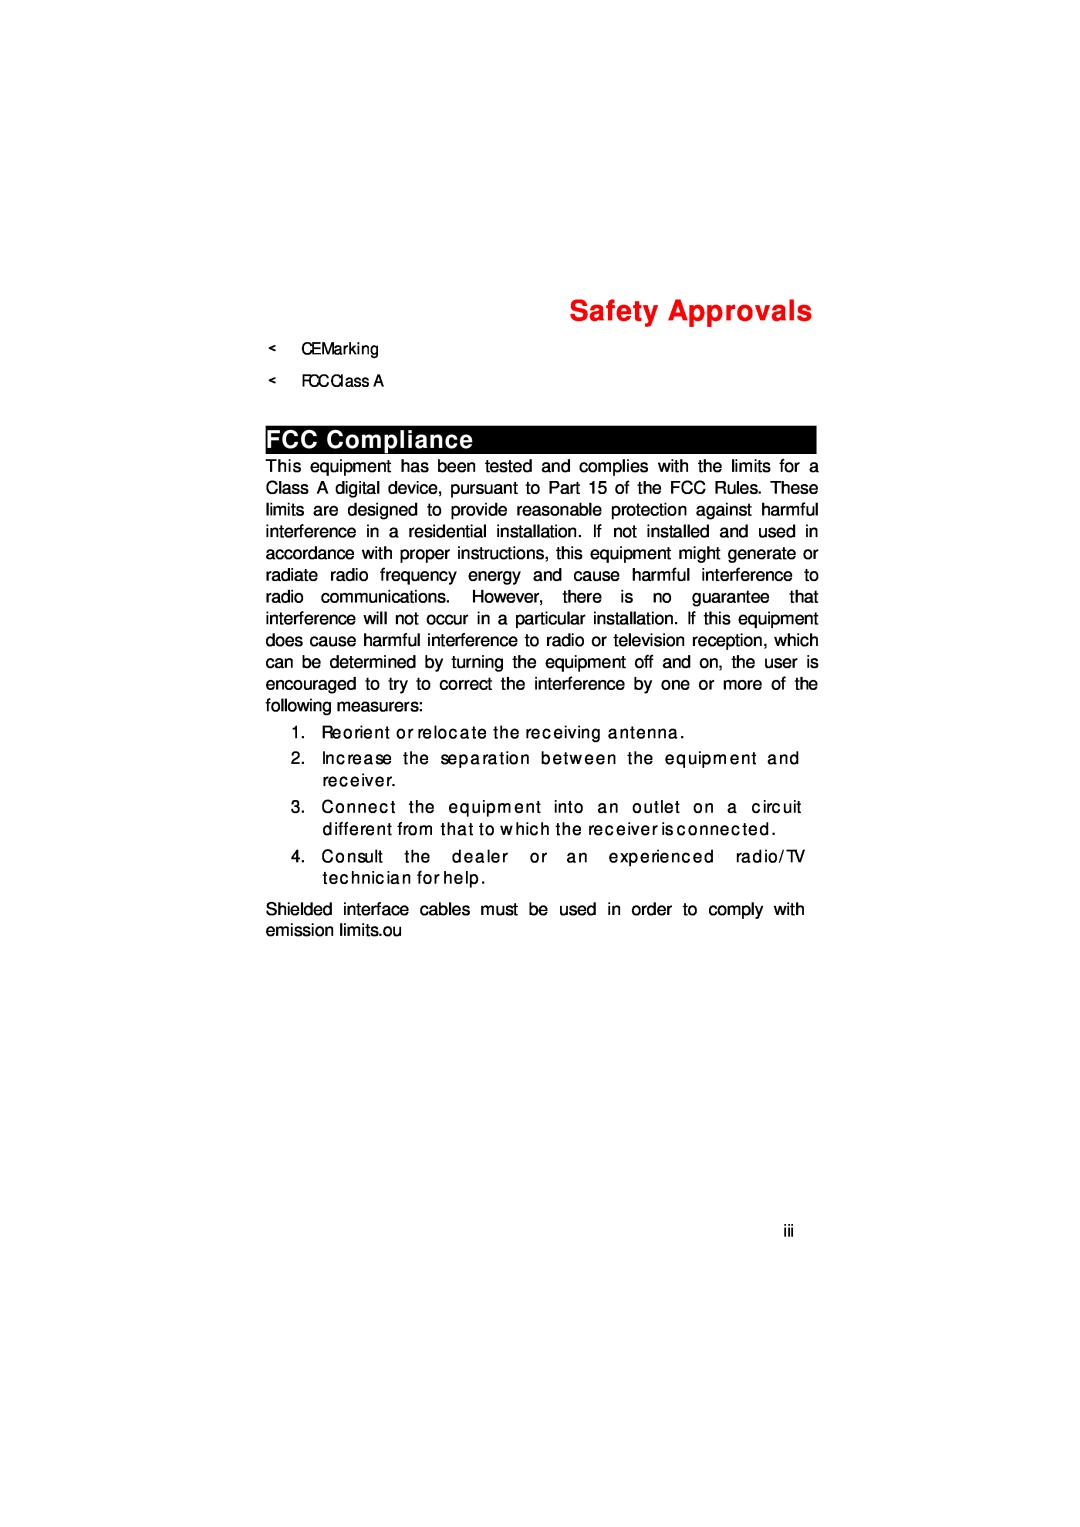 Acnodes FPC 8084 user manual Safety Approvals, FCC Compliance 